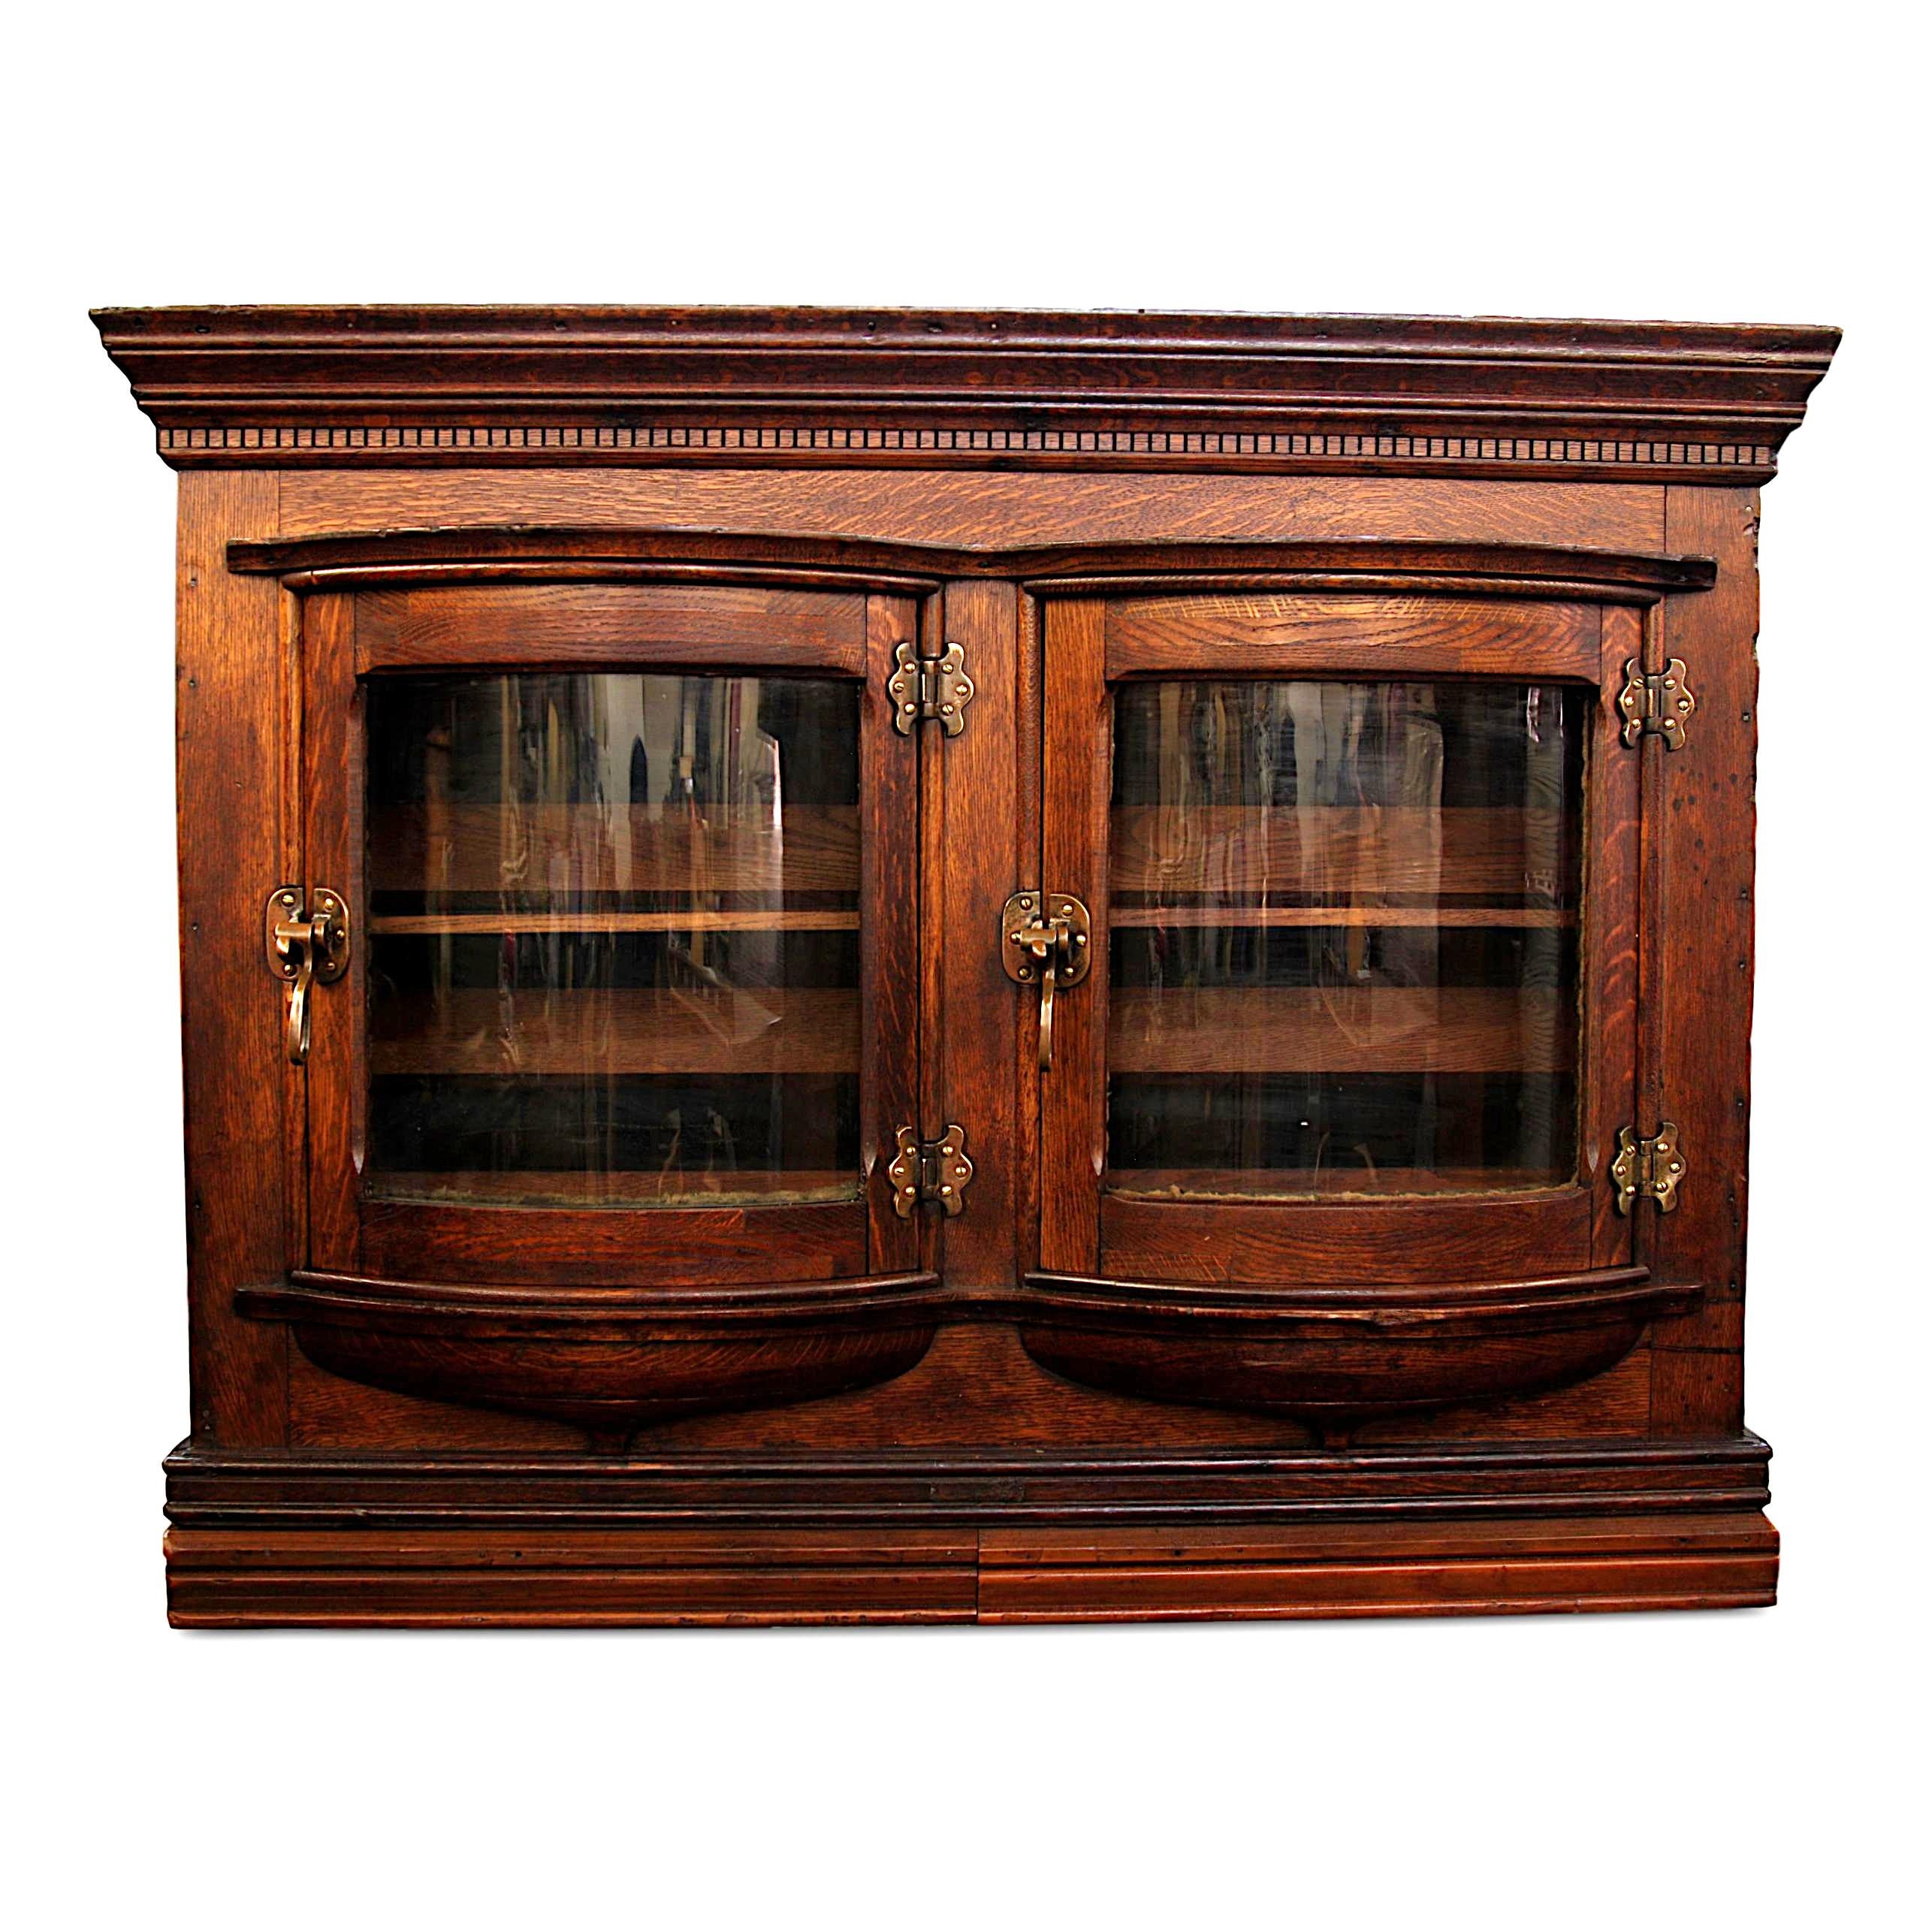 This is a rare and wonderful antique general store display case/ice box. Ice box features a gorgeous quarter-sawn, solid oak case with raised panels, solid brass hardware, and amazing curved-glass, 